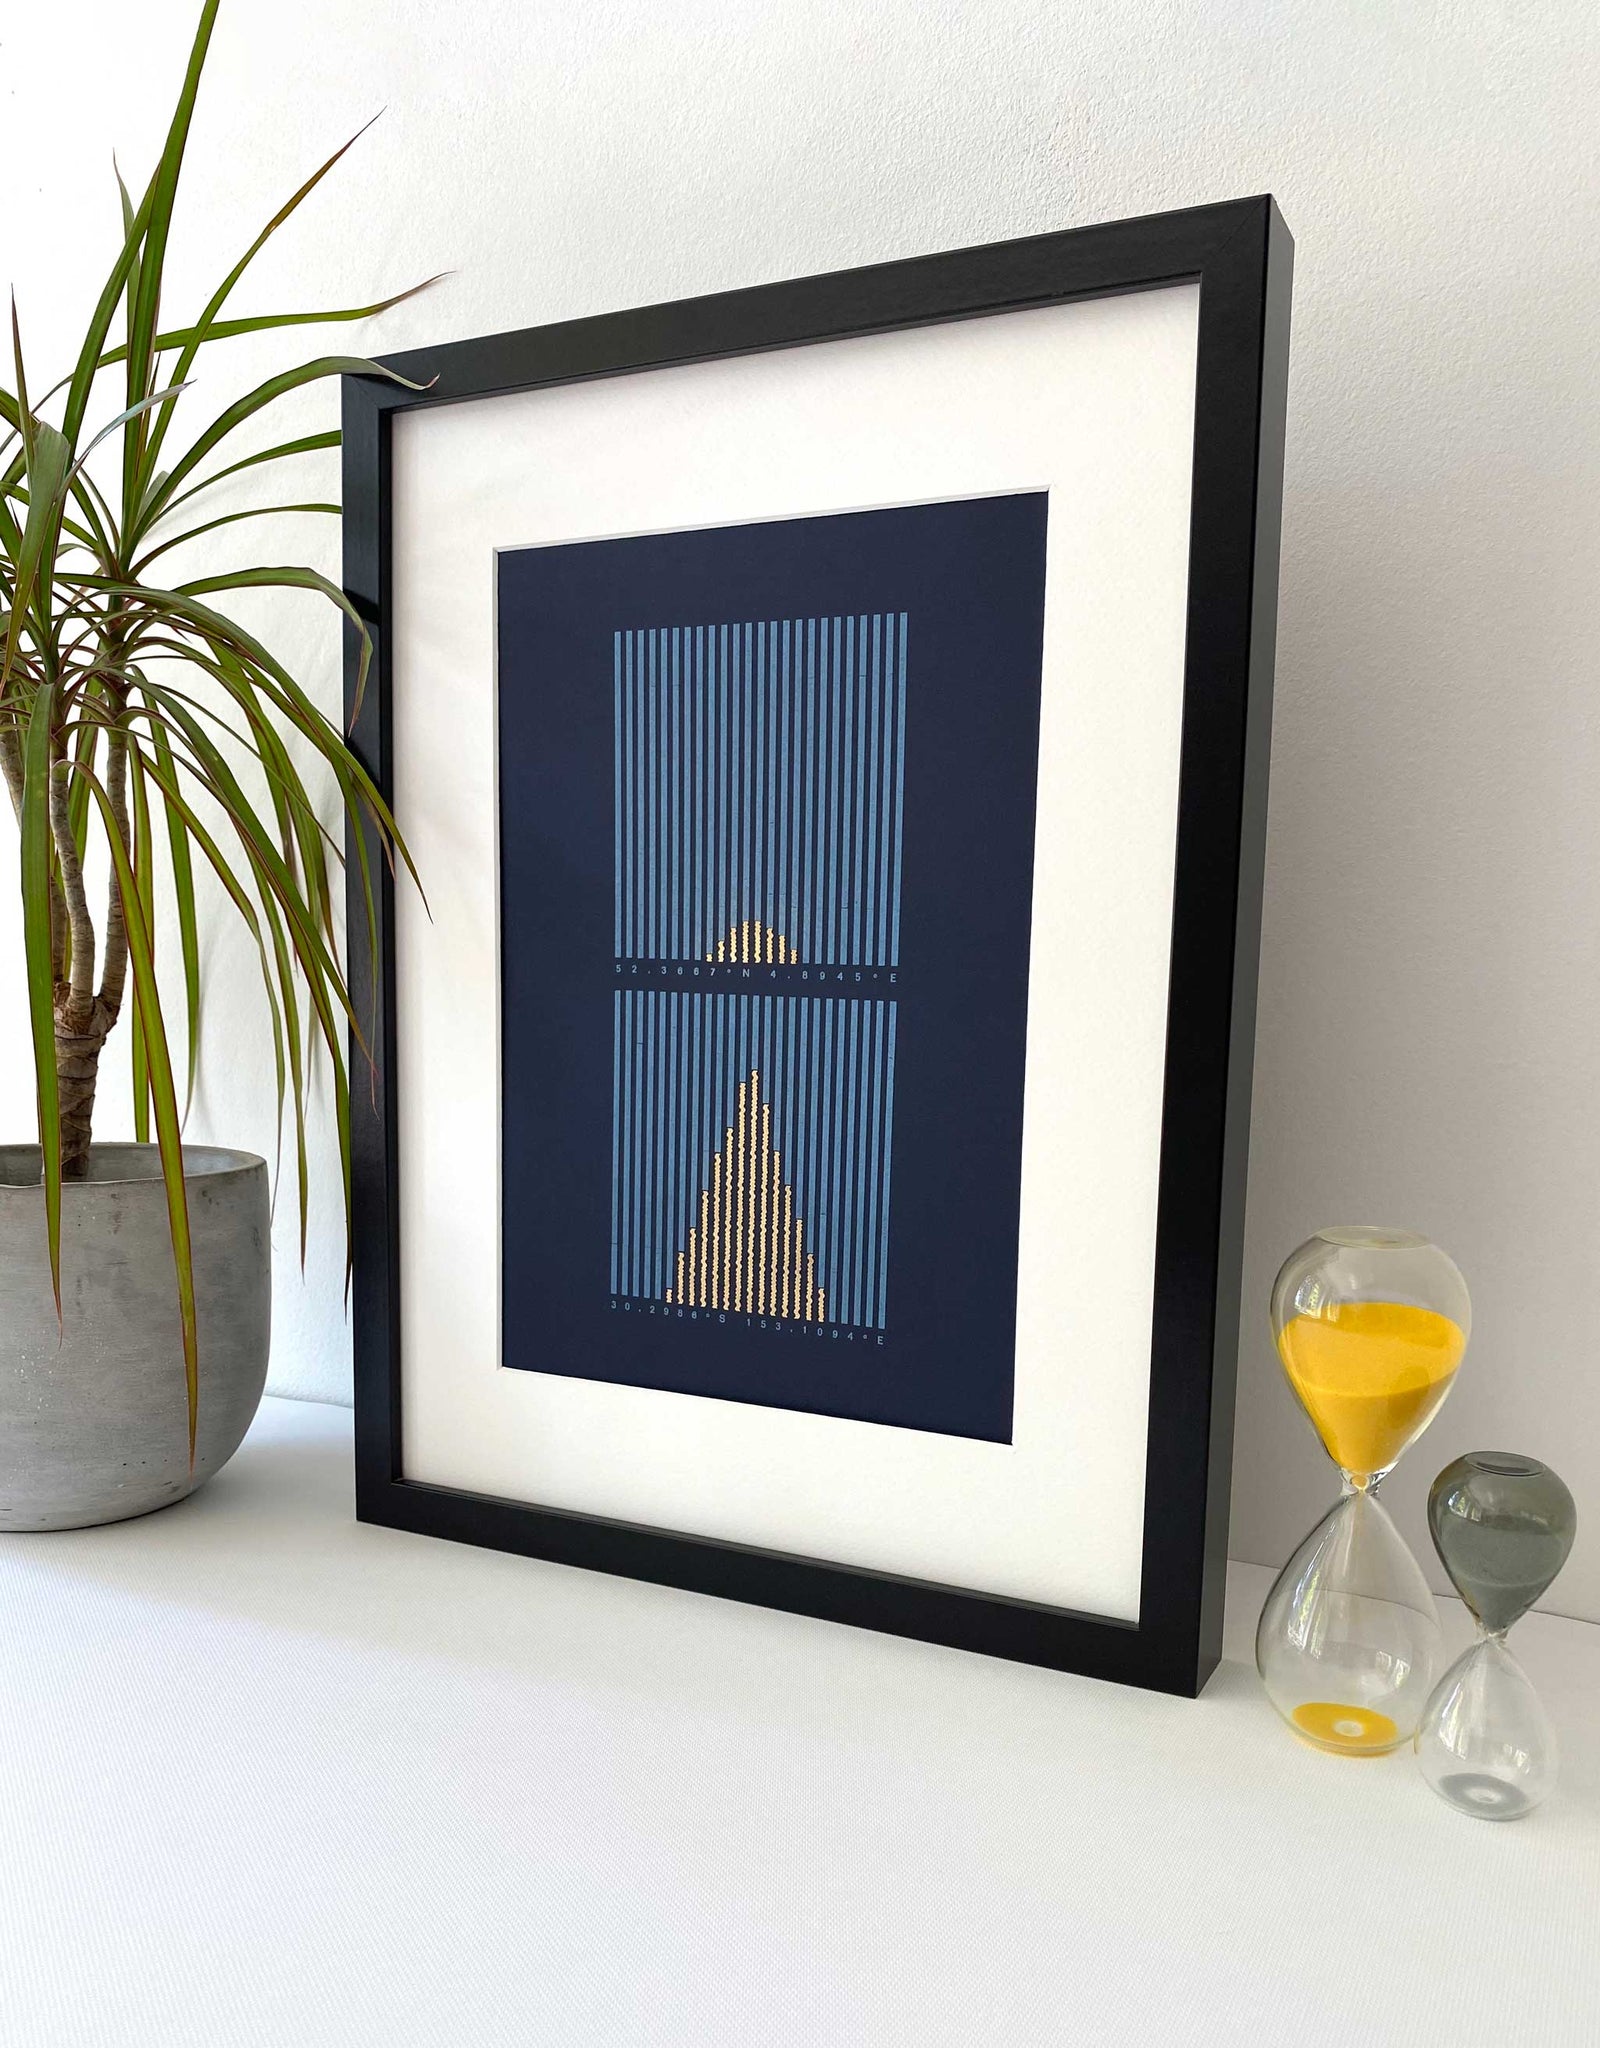 Framed Letterpress data print Sunlight Hours. Light blue and gold vertical lines on dark blue background. Lifestyle image with plant and props.